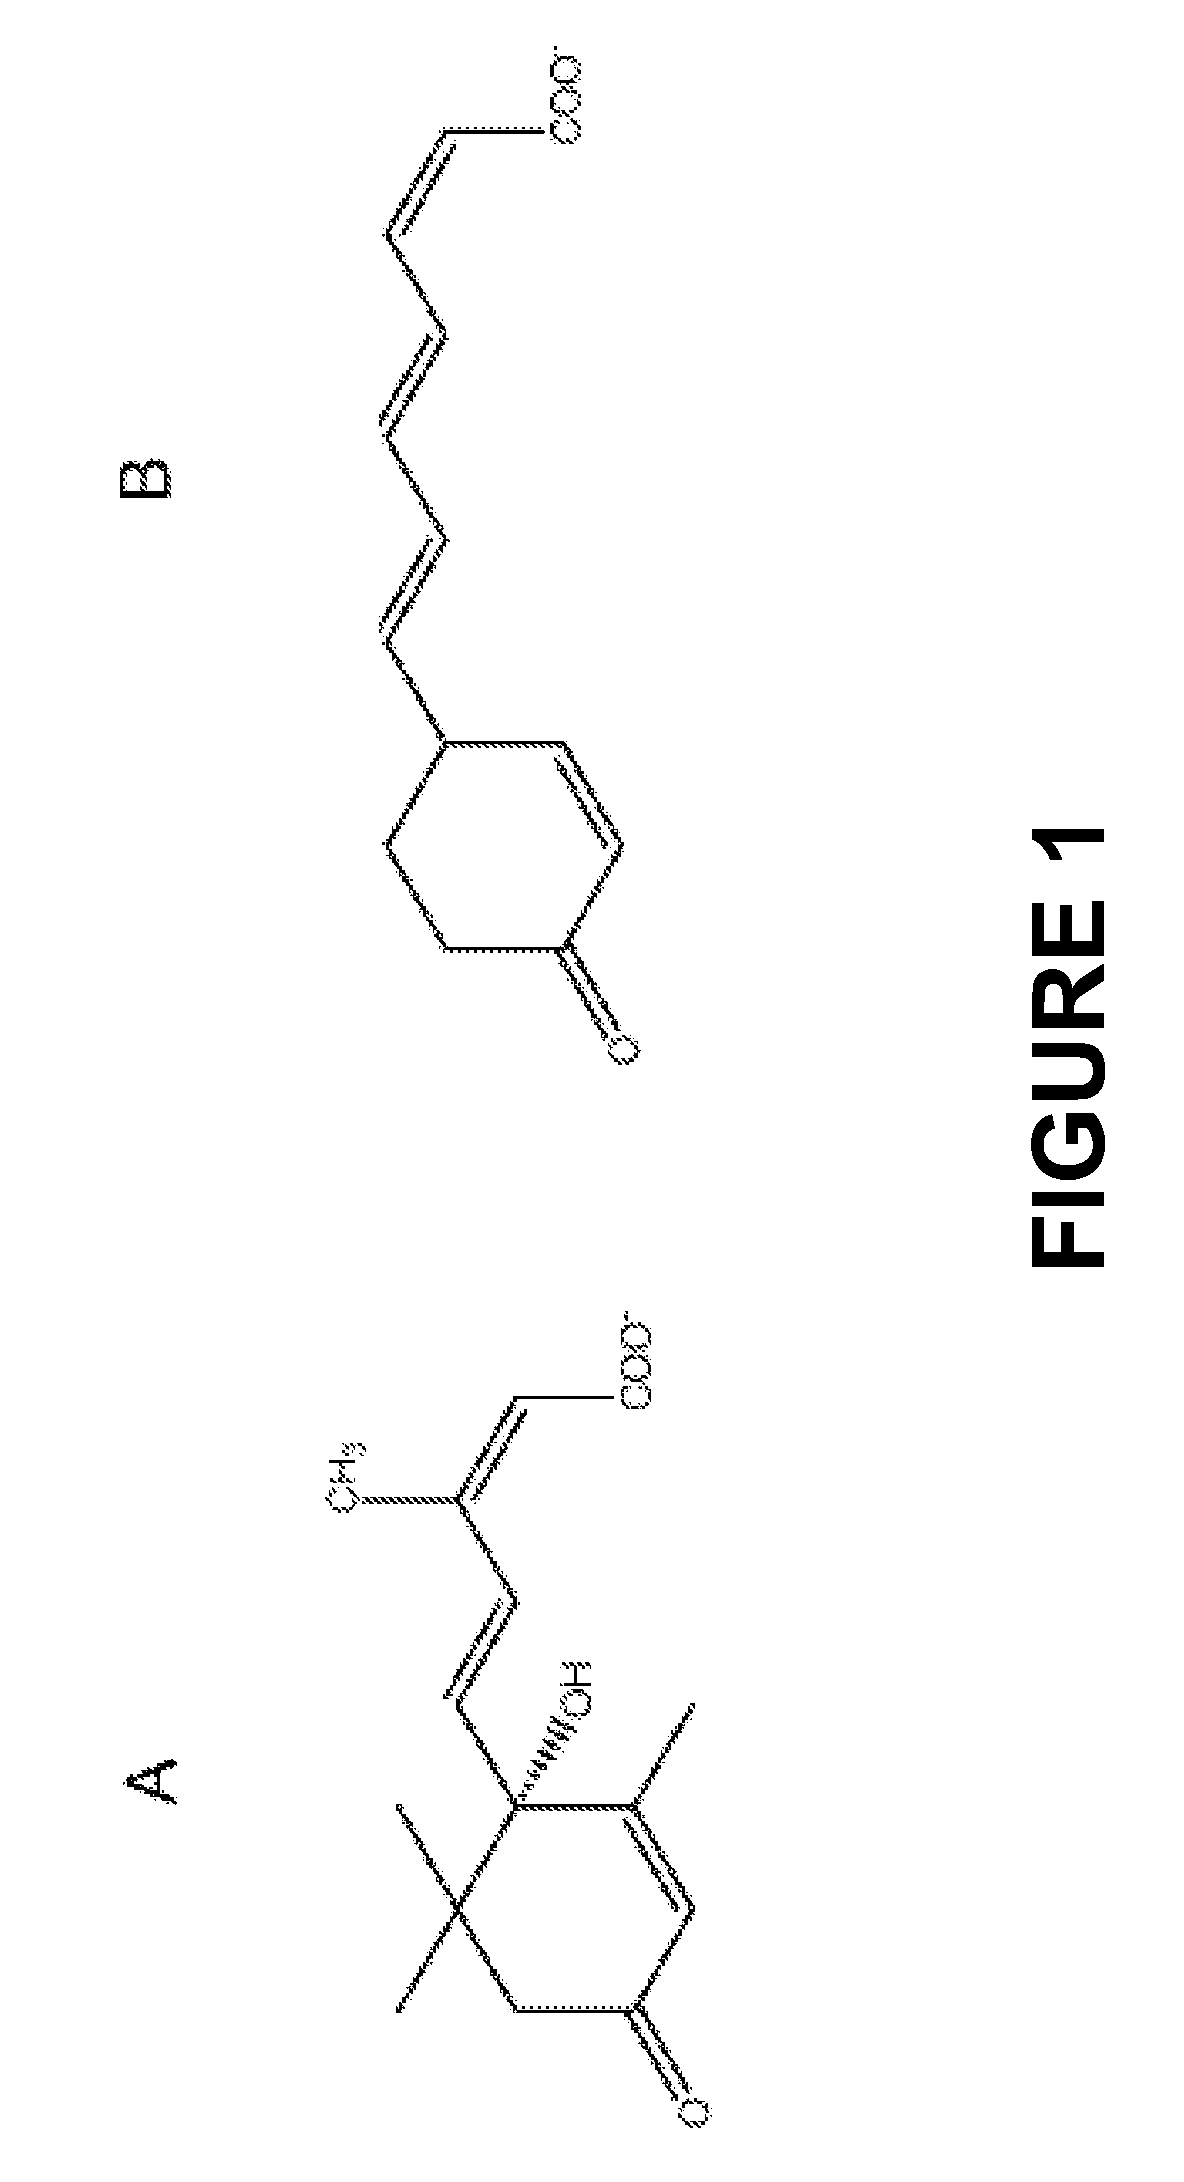 Methods of using abscisic acid for ameliorating hypertension and vascular inflammation